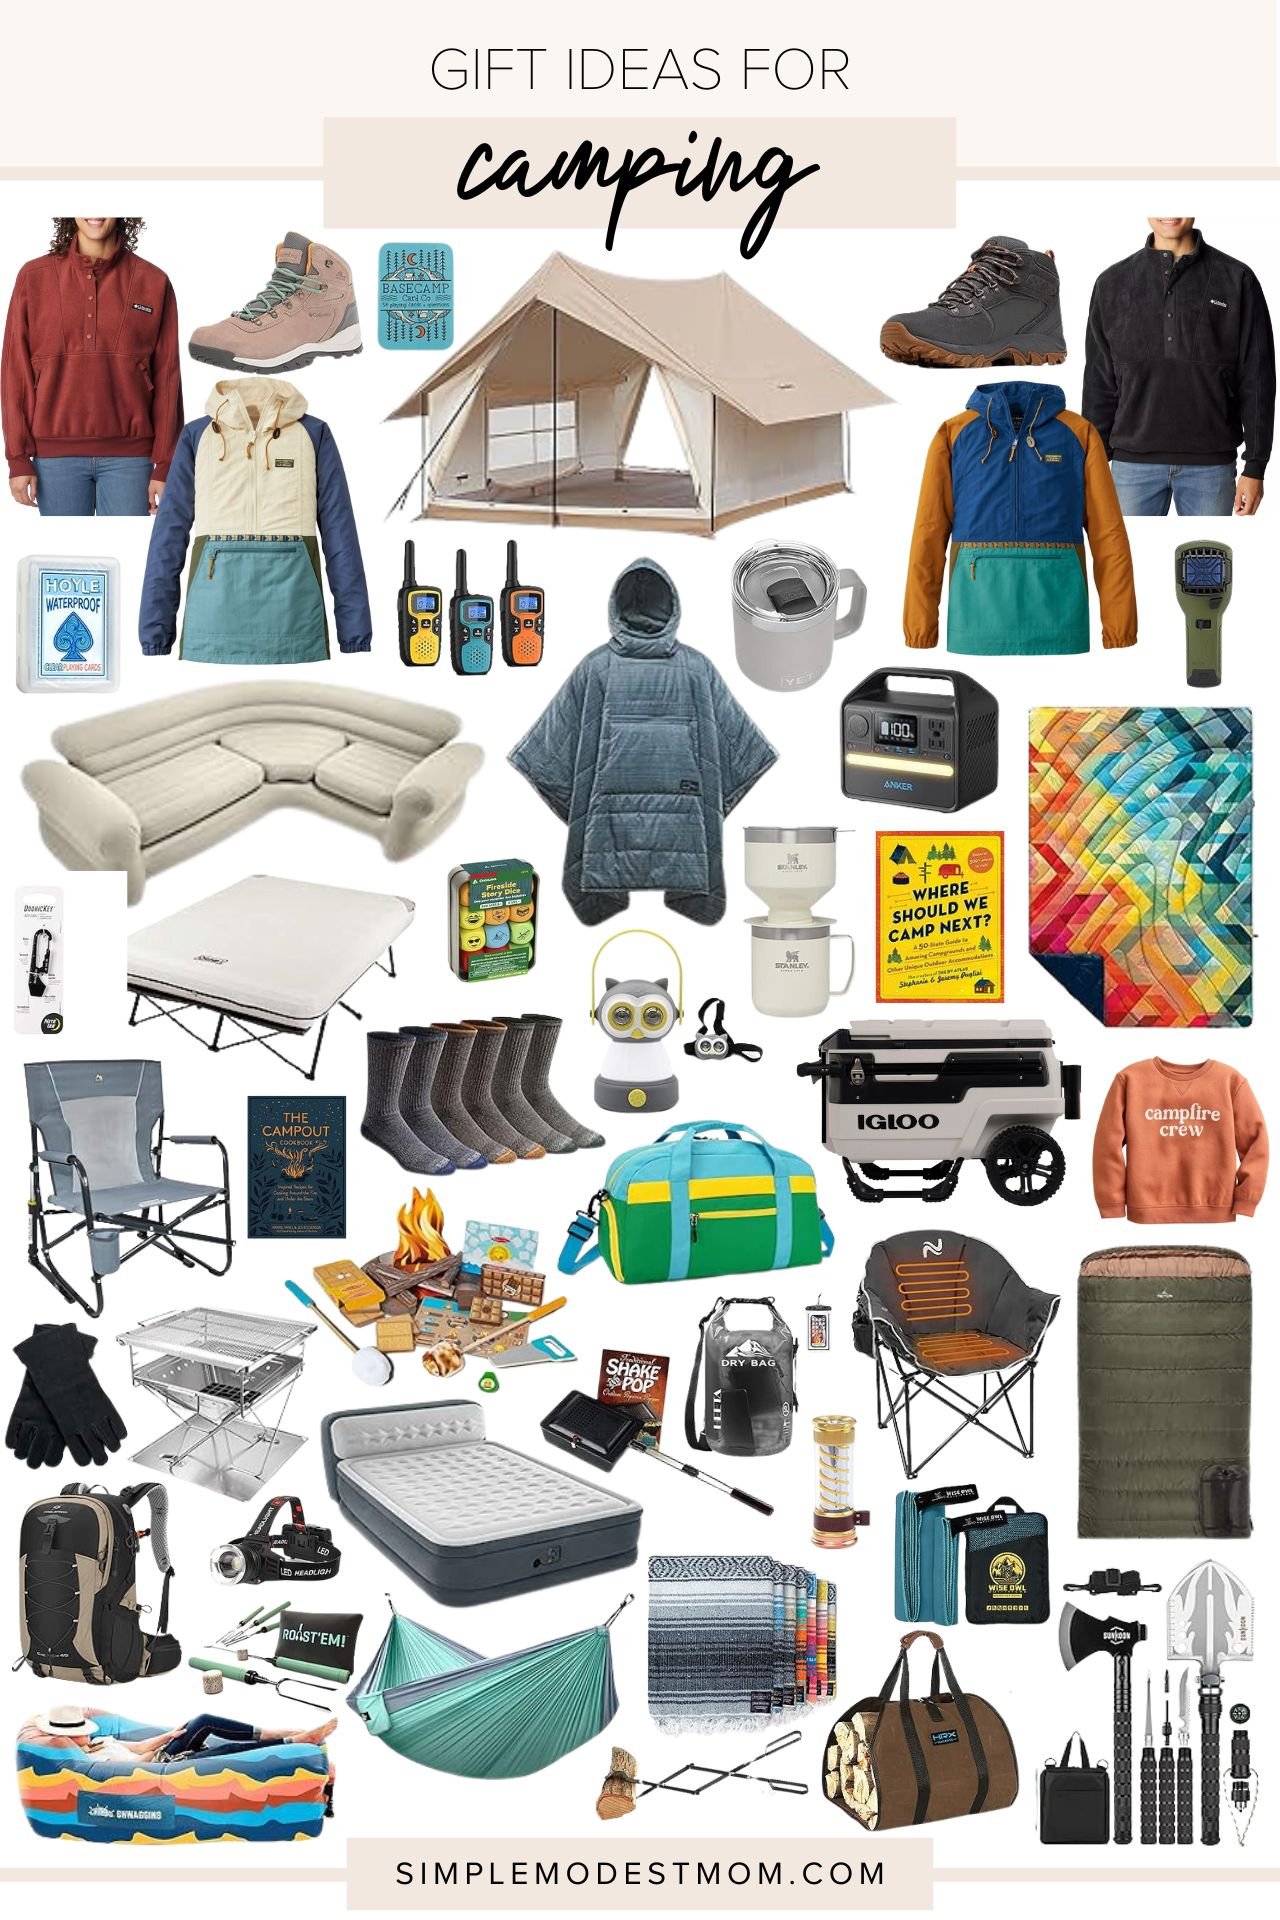 Must-Have Camping Gifts for the Modern Outdoor Explorer